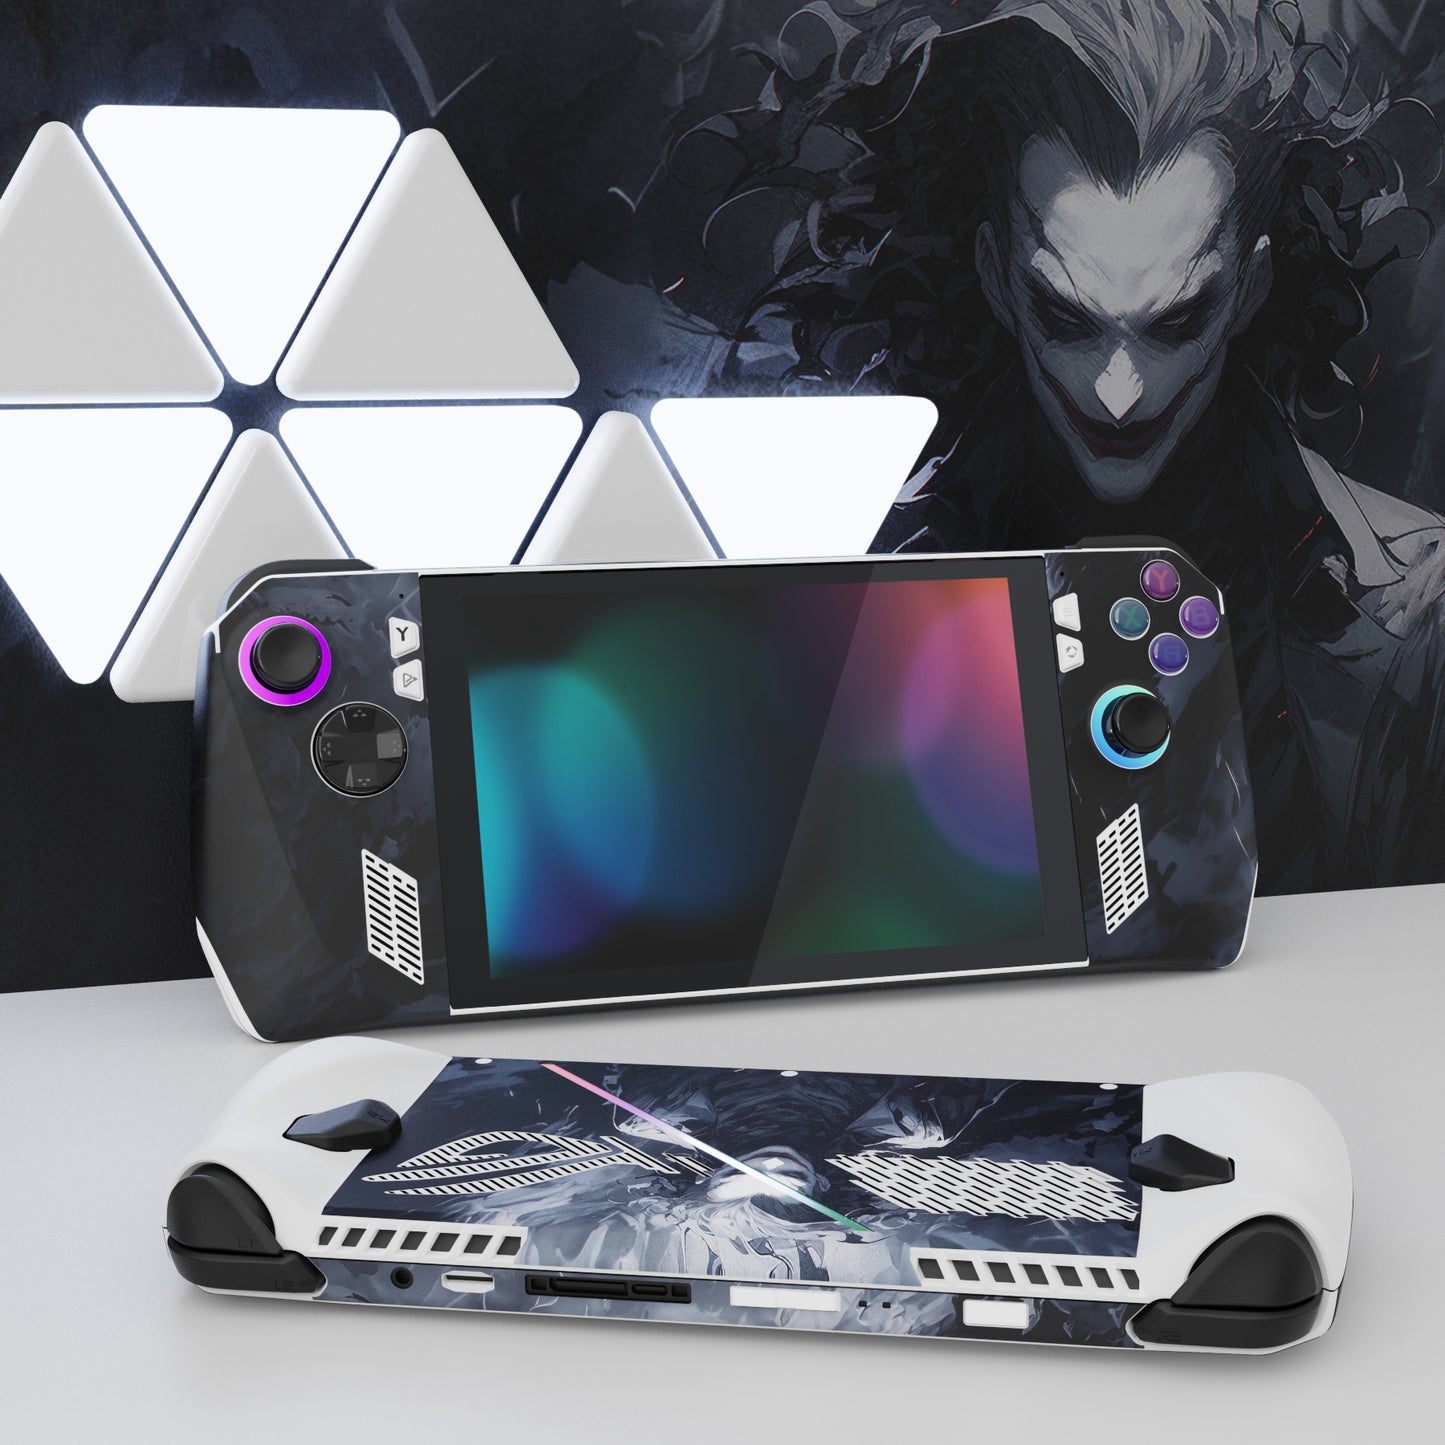 PlayVital Dark Clown Custom Stickers Vinyl Wraps Protective Skin Decal for ROG Ally Handheld Gaming Console - RGTM021 PlayVital